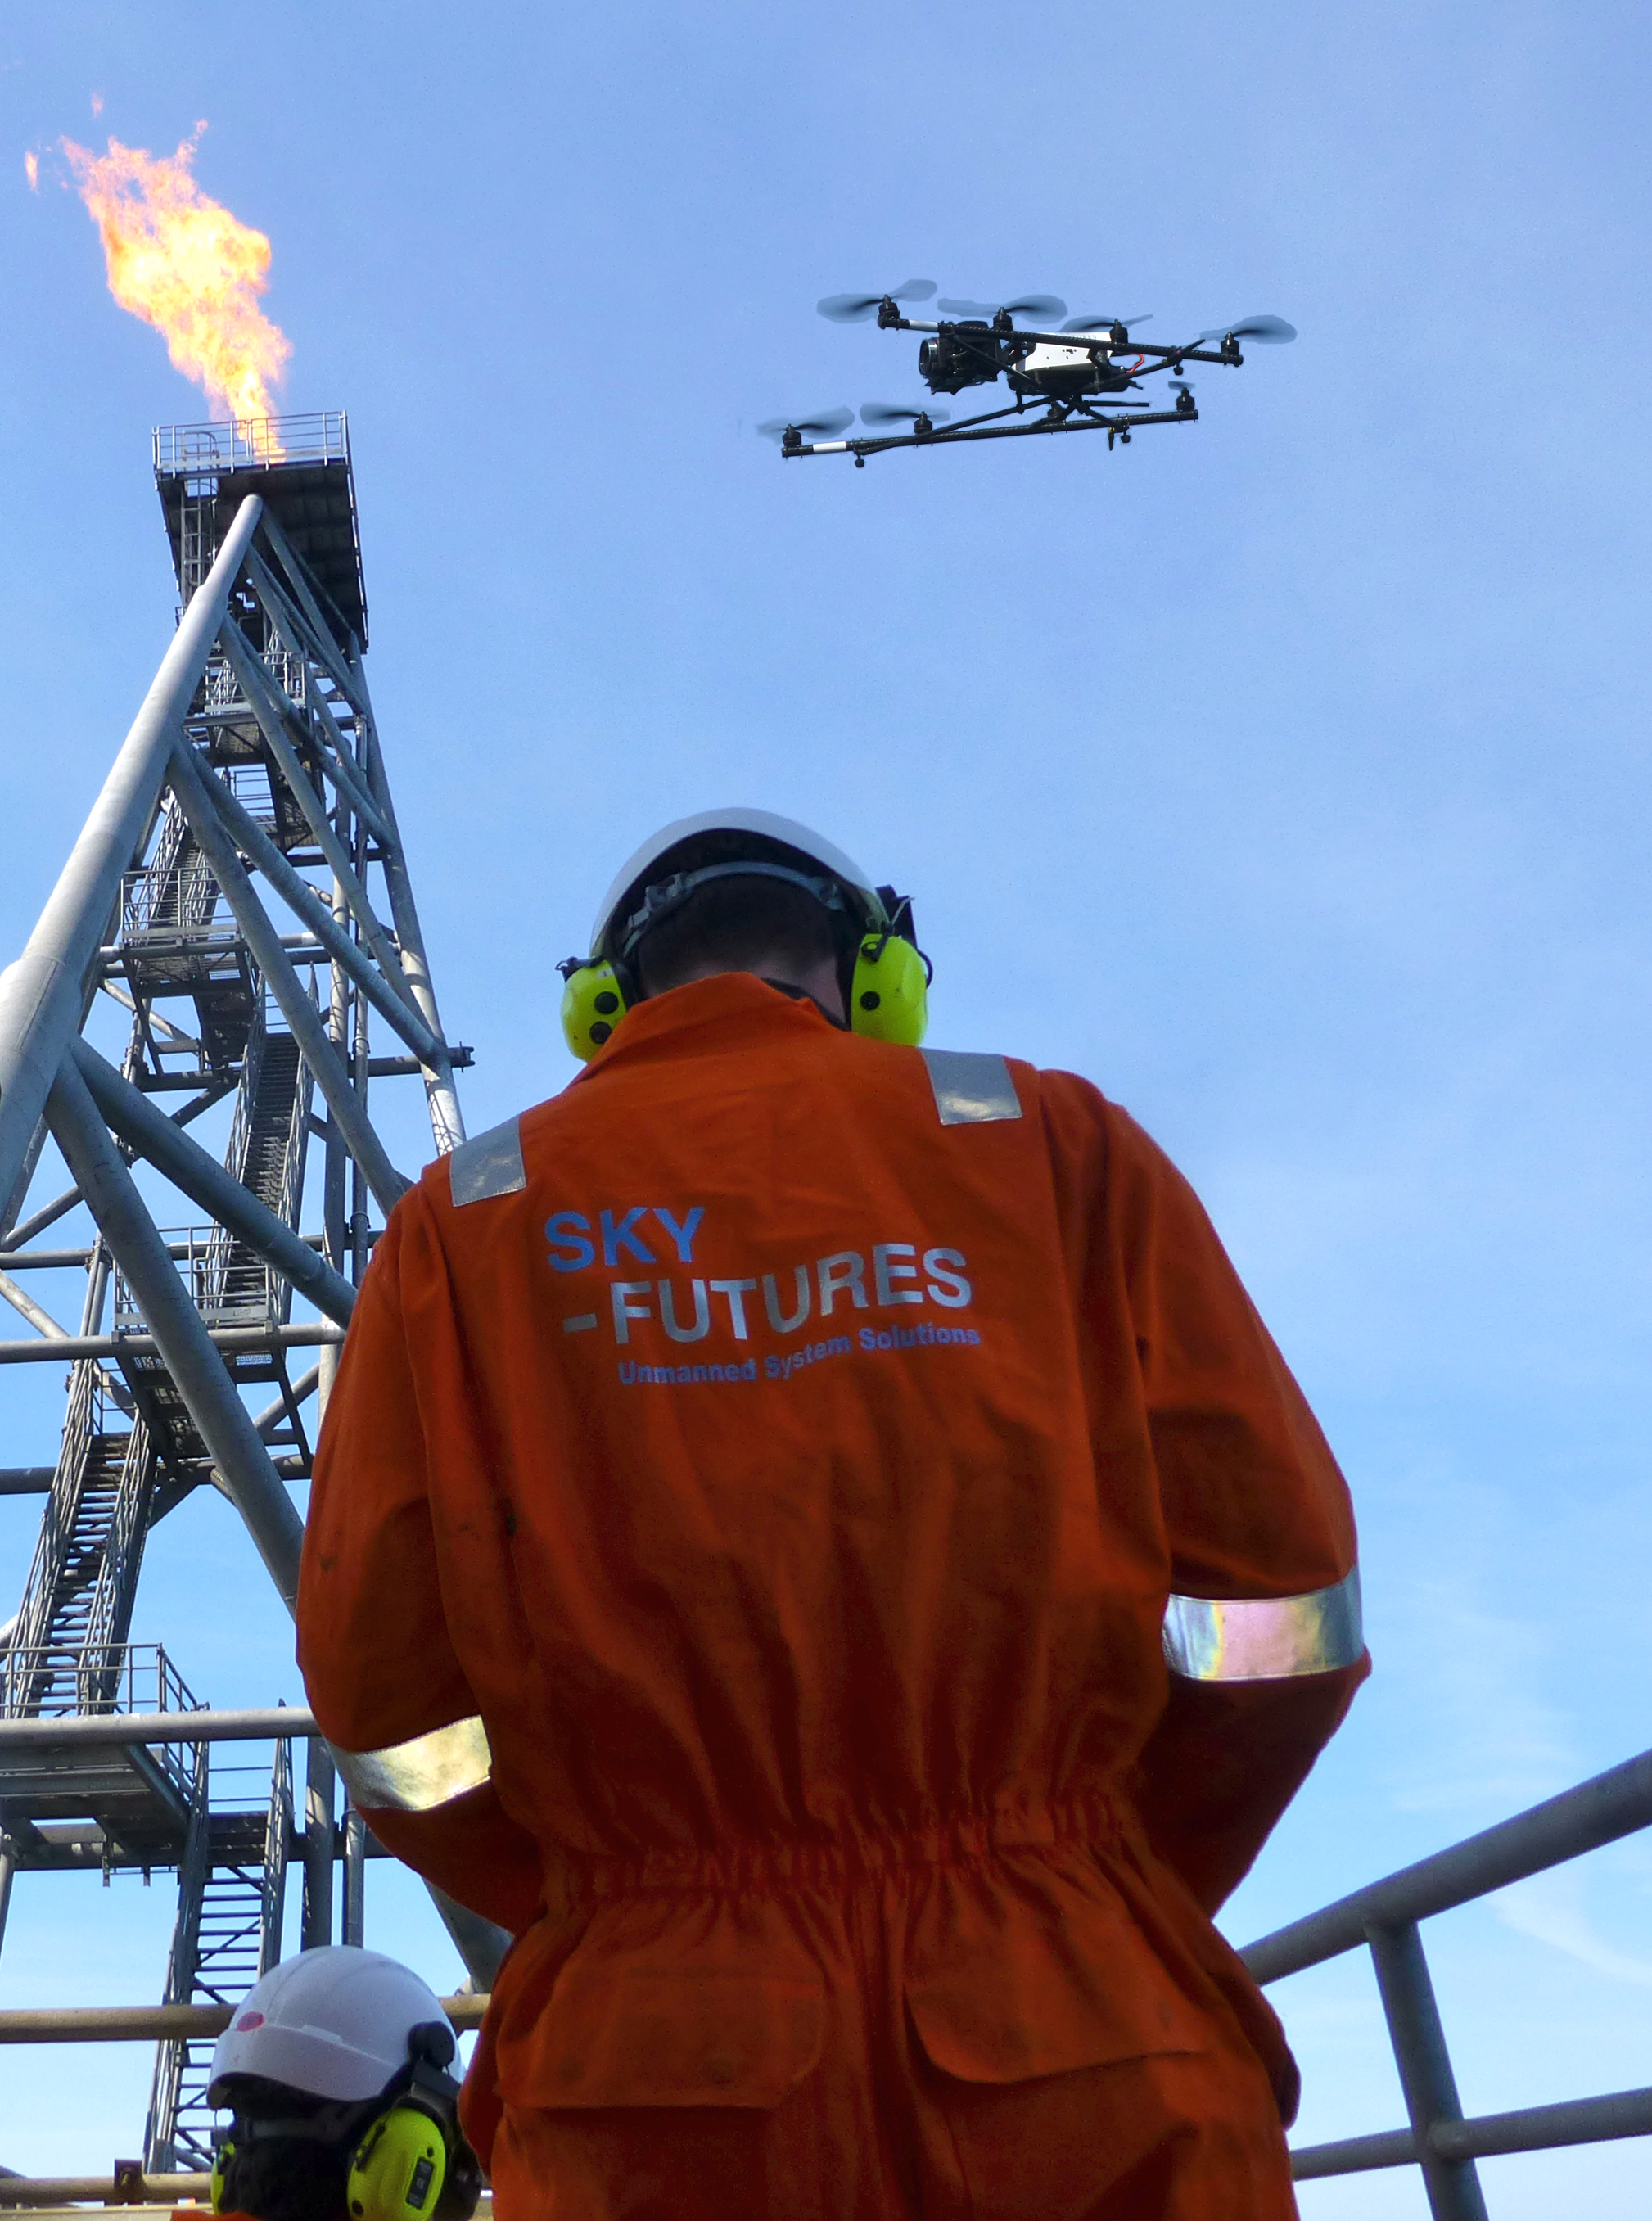 Drones used for oil and gas inspection